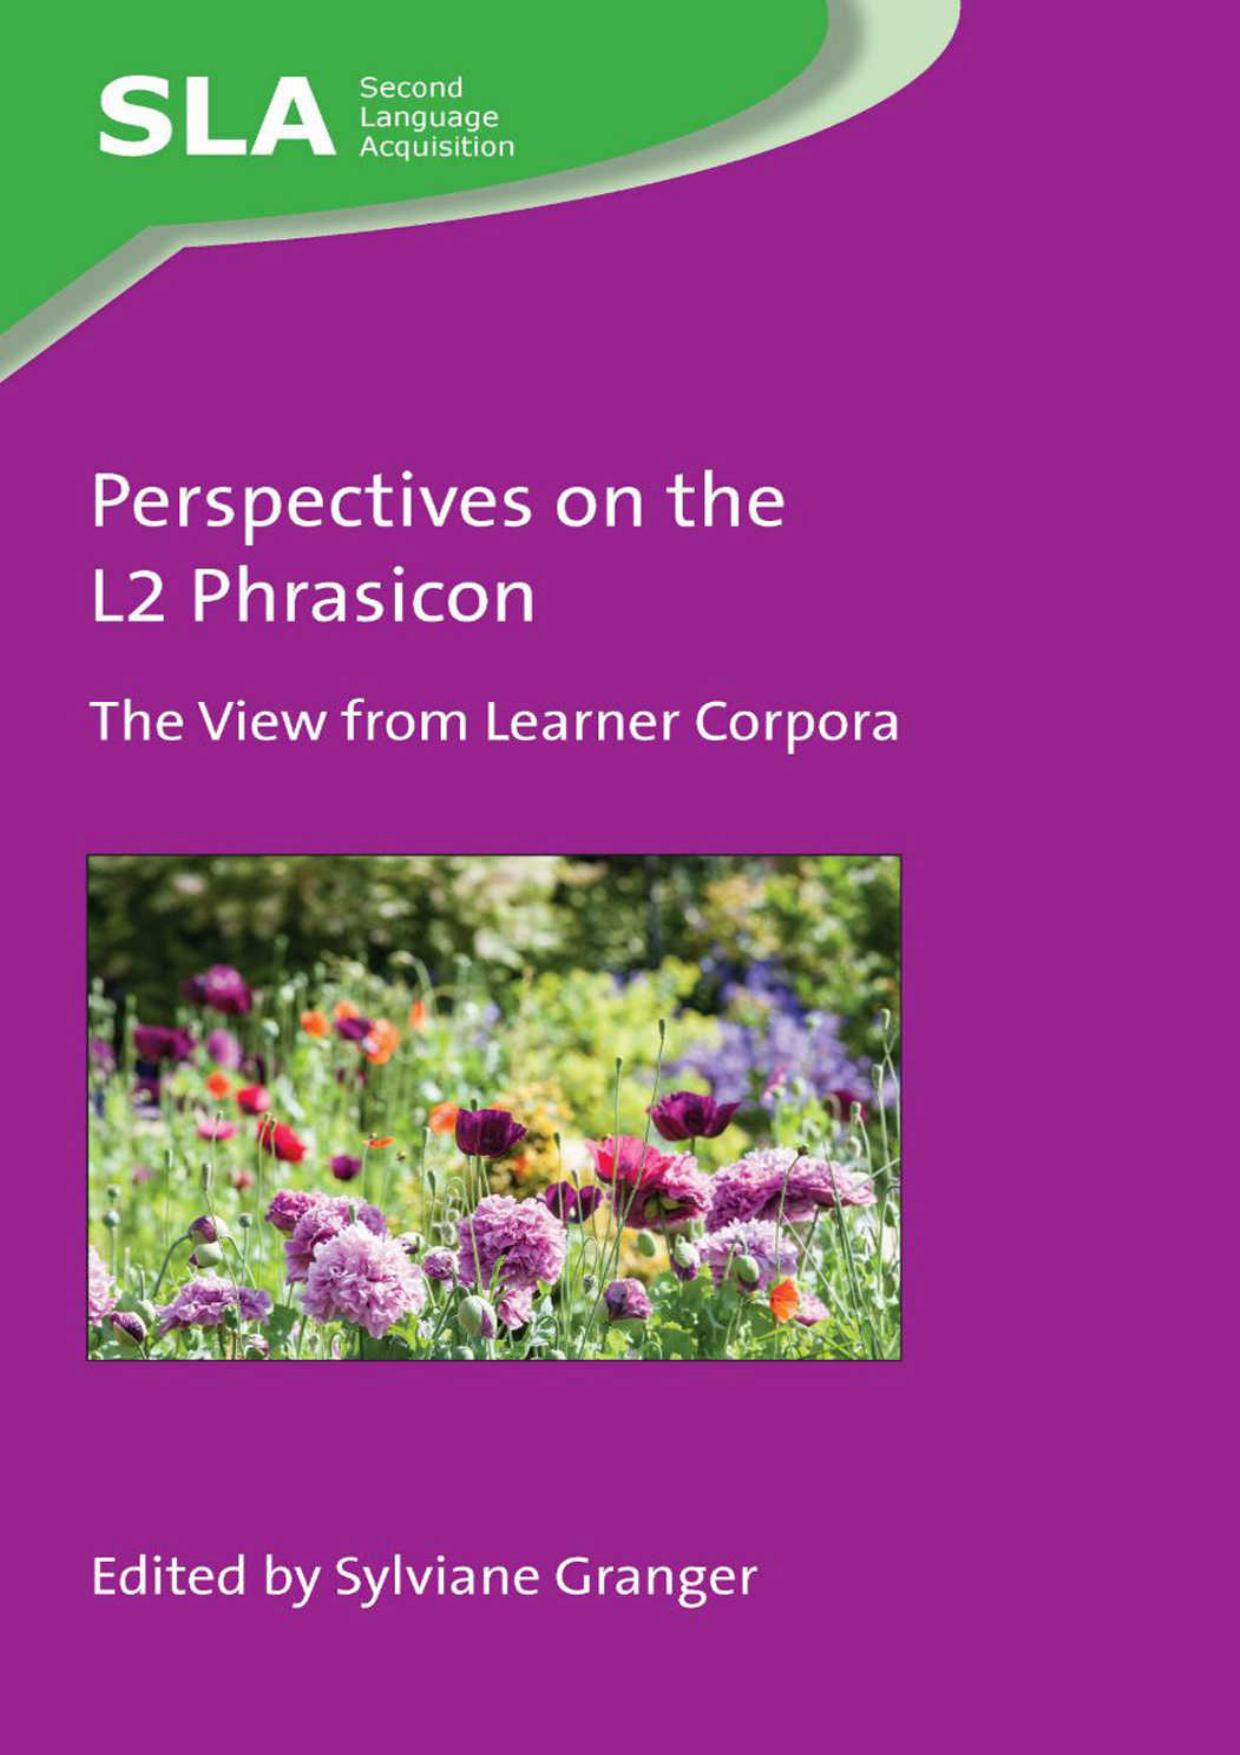 (eBook PDF)Perspectives on the L2 Phrasicon: The View from Learner Corpora by Dr. Sylviane Granger